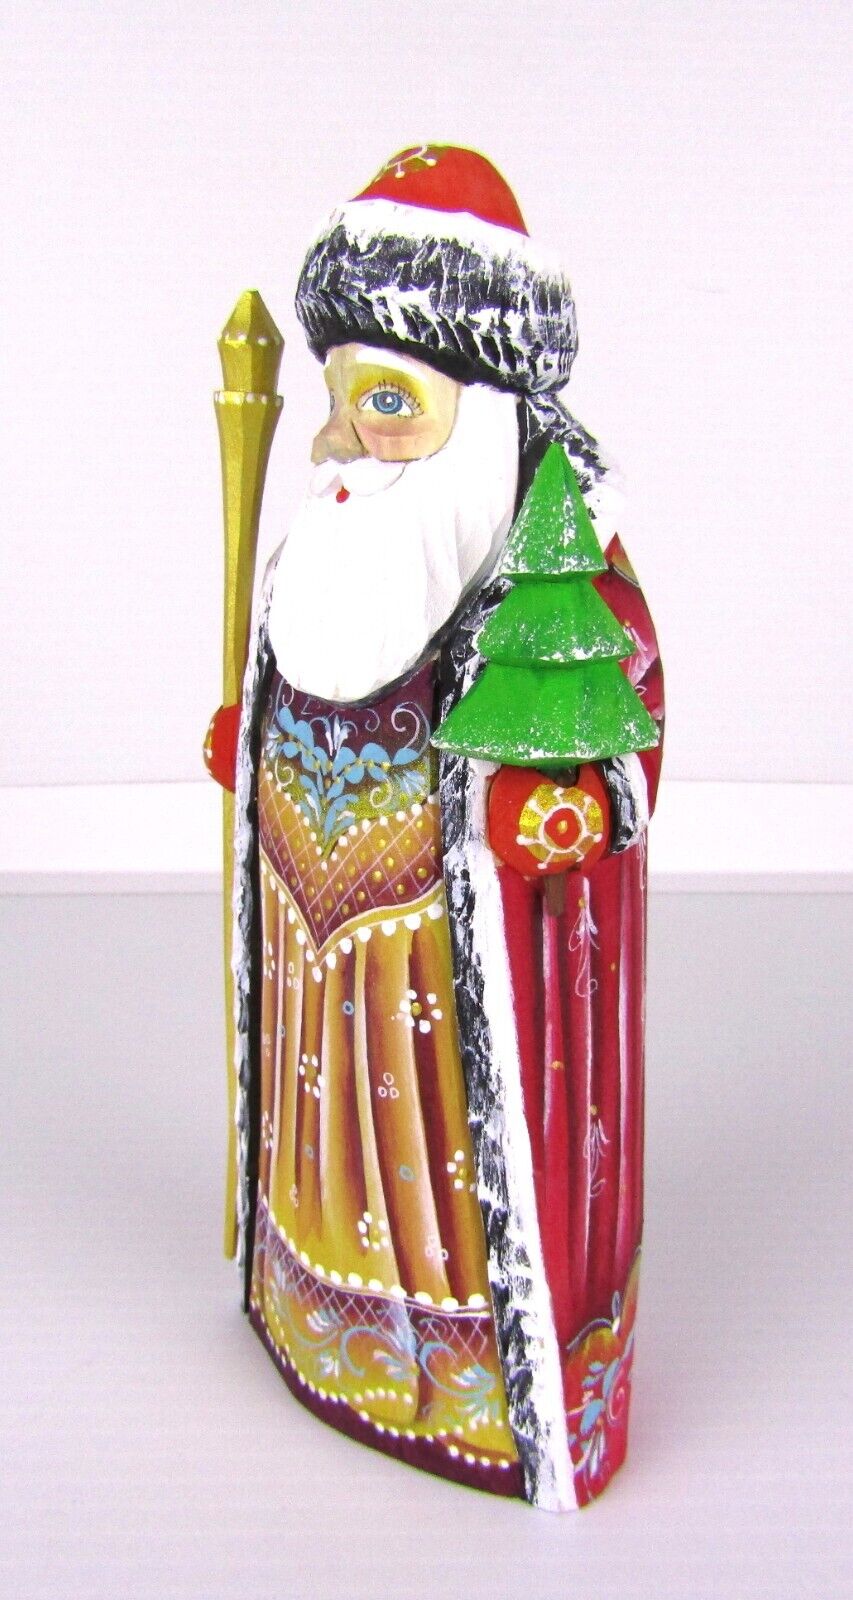 6" Russian Carved Santa Claus Red Figure Tree Staff Hand Made Linden Christmas Без бренда - фотография #7